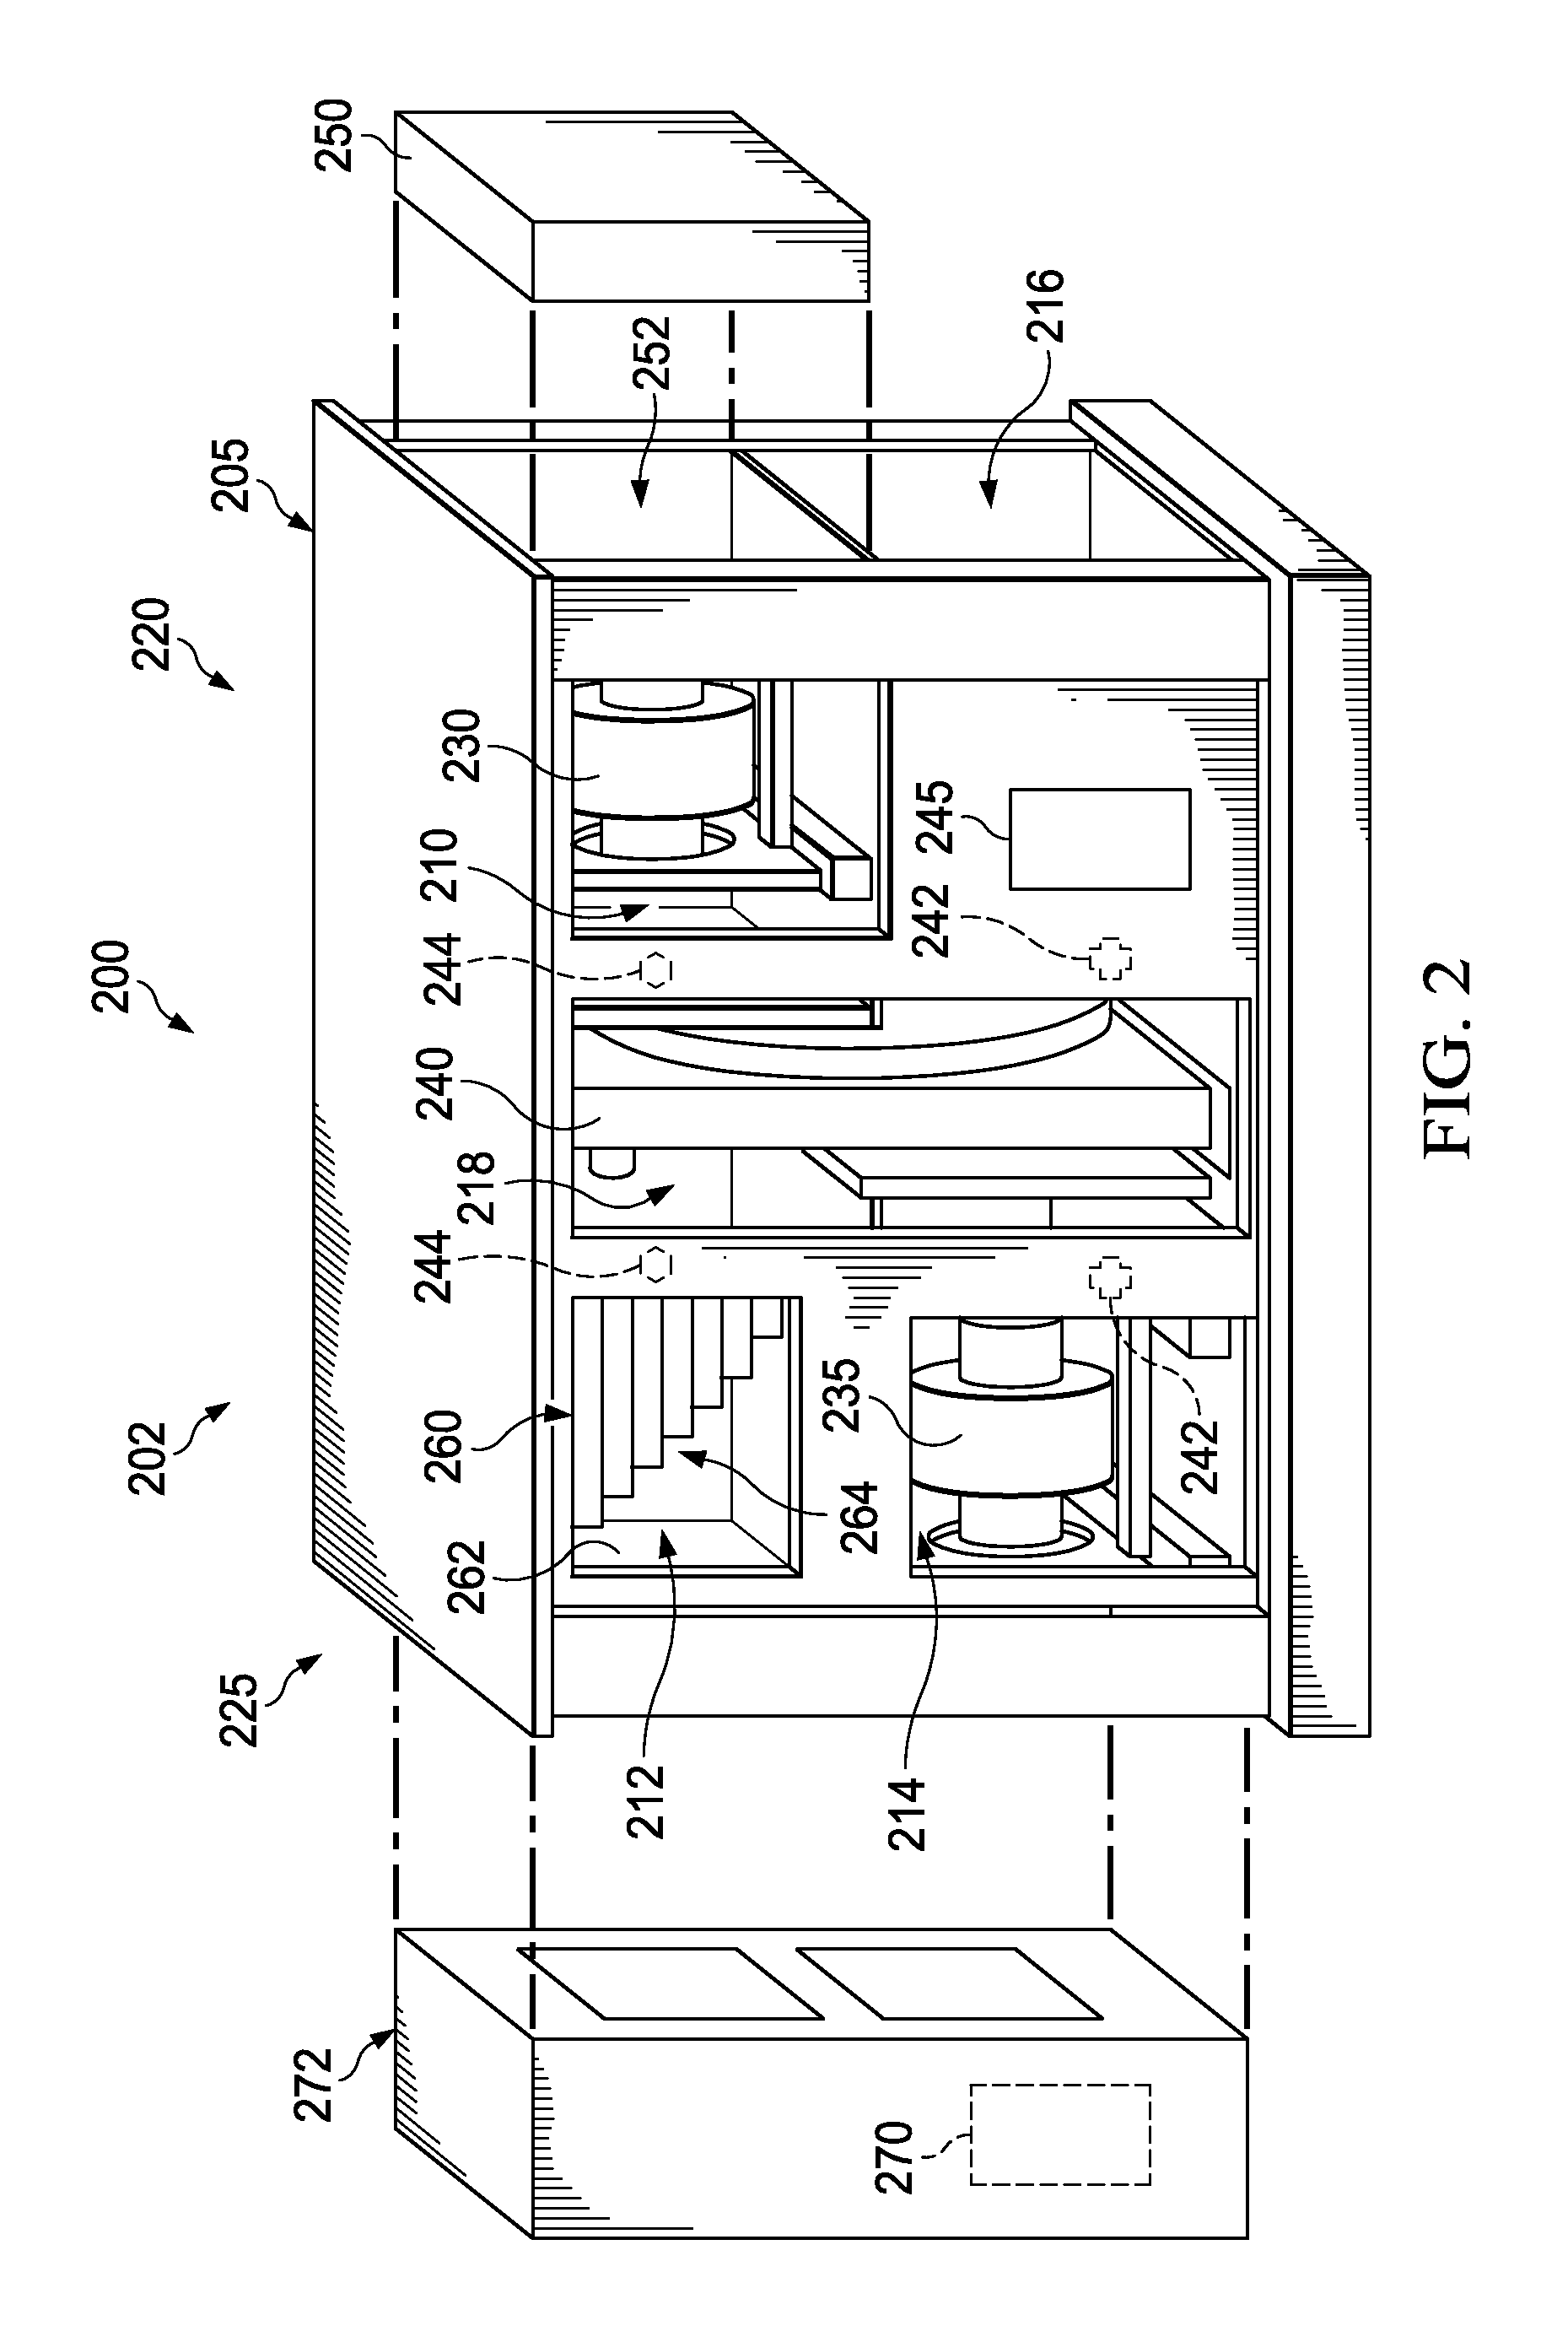 Method of defrosting an energy recovery ventilator unit